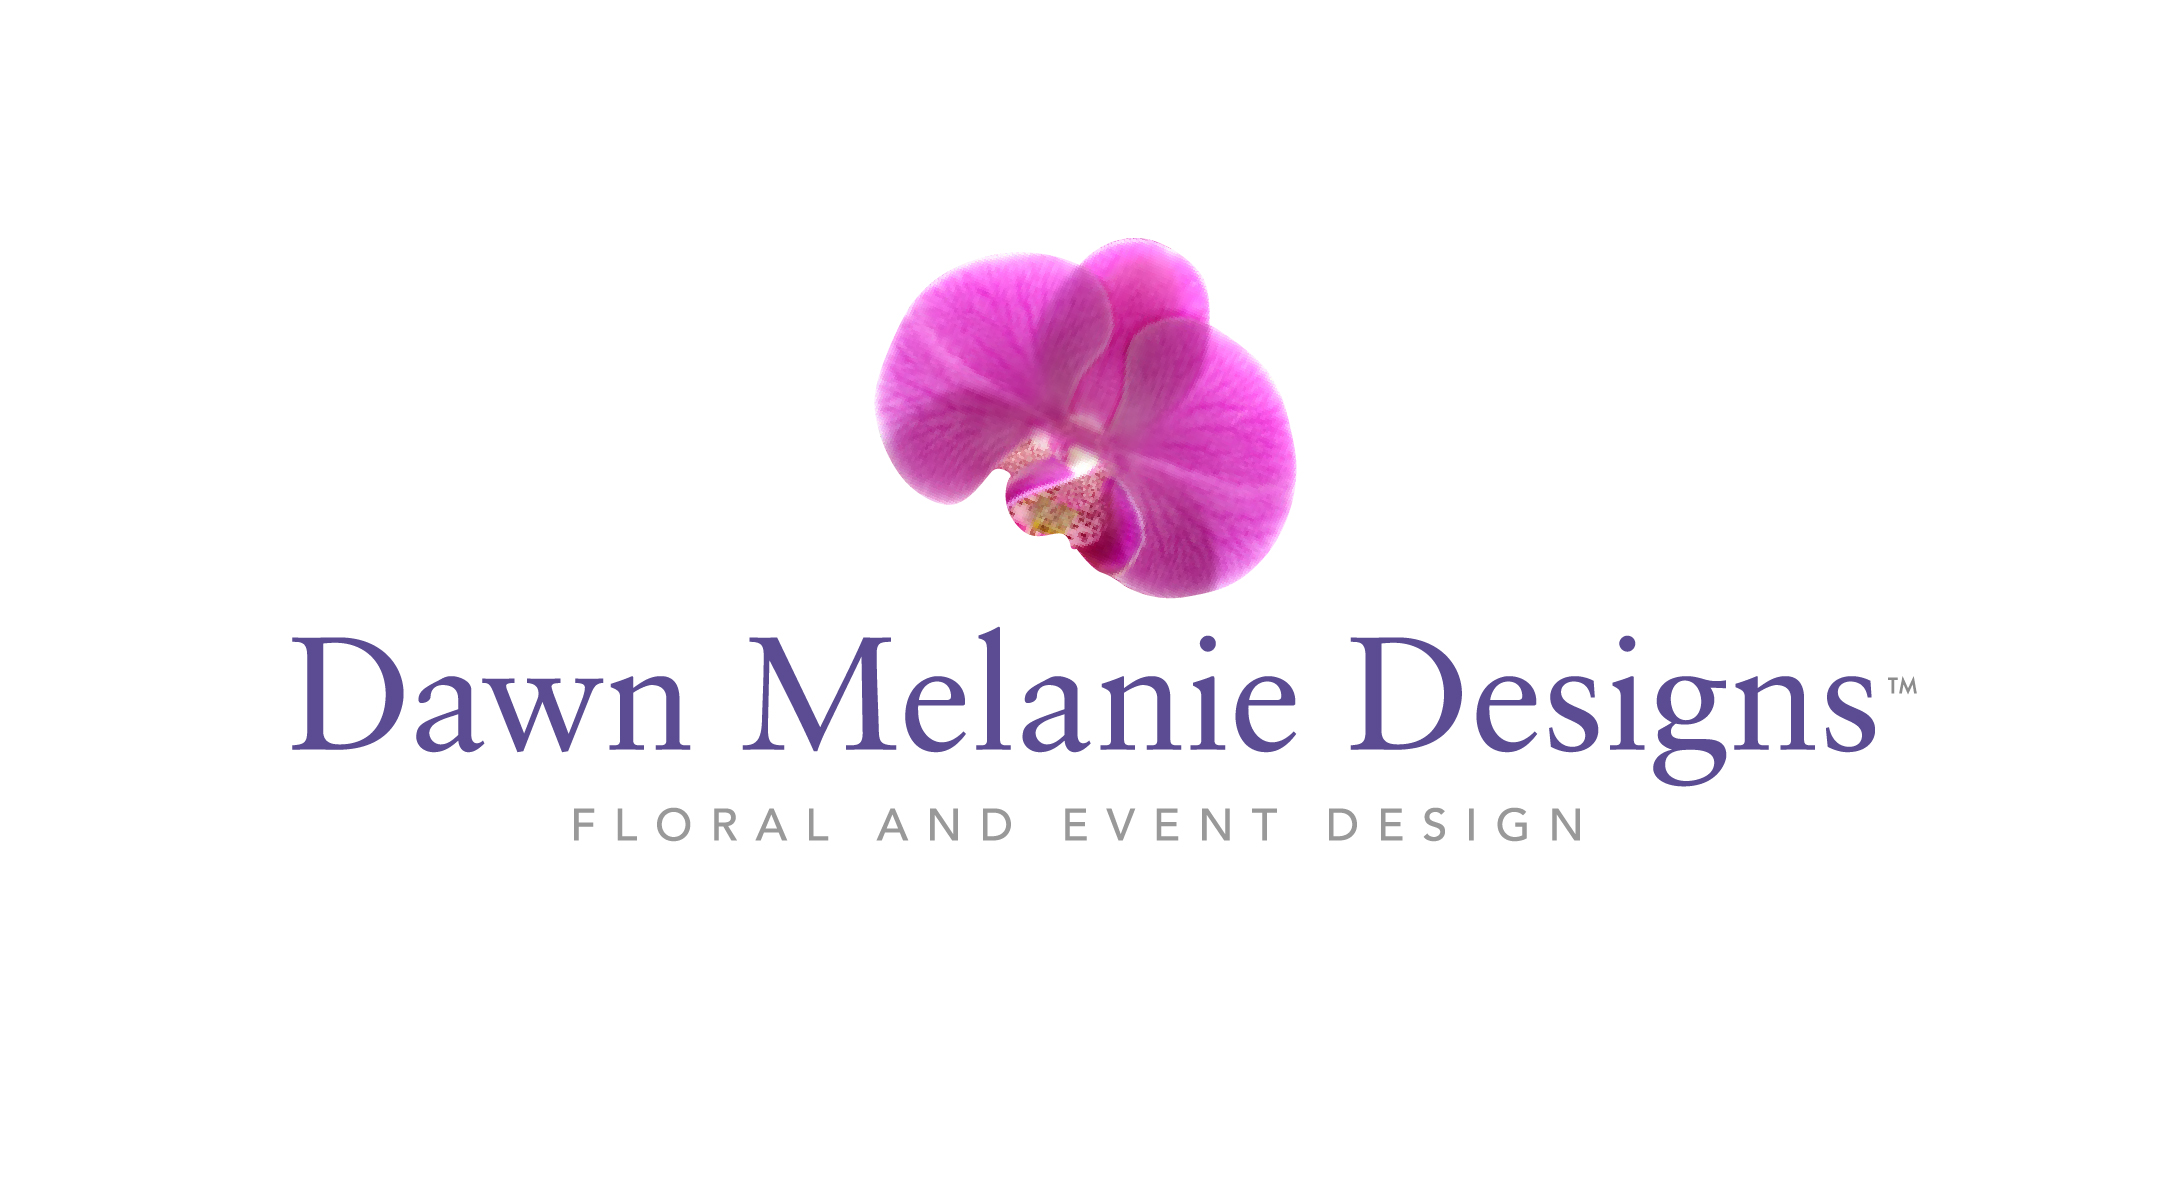 Logotype created for Dawn Melanie Designs, a luxury floral designer providing florals for large scale events and building lobbies.